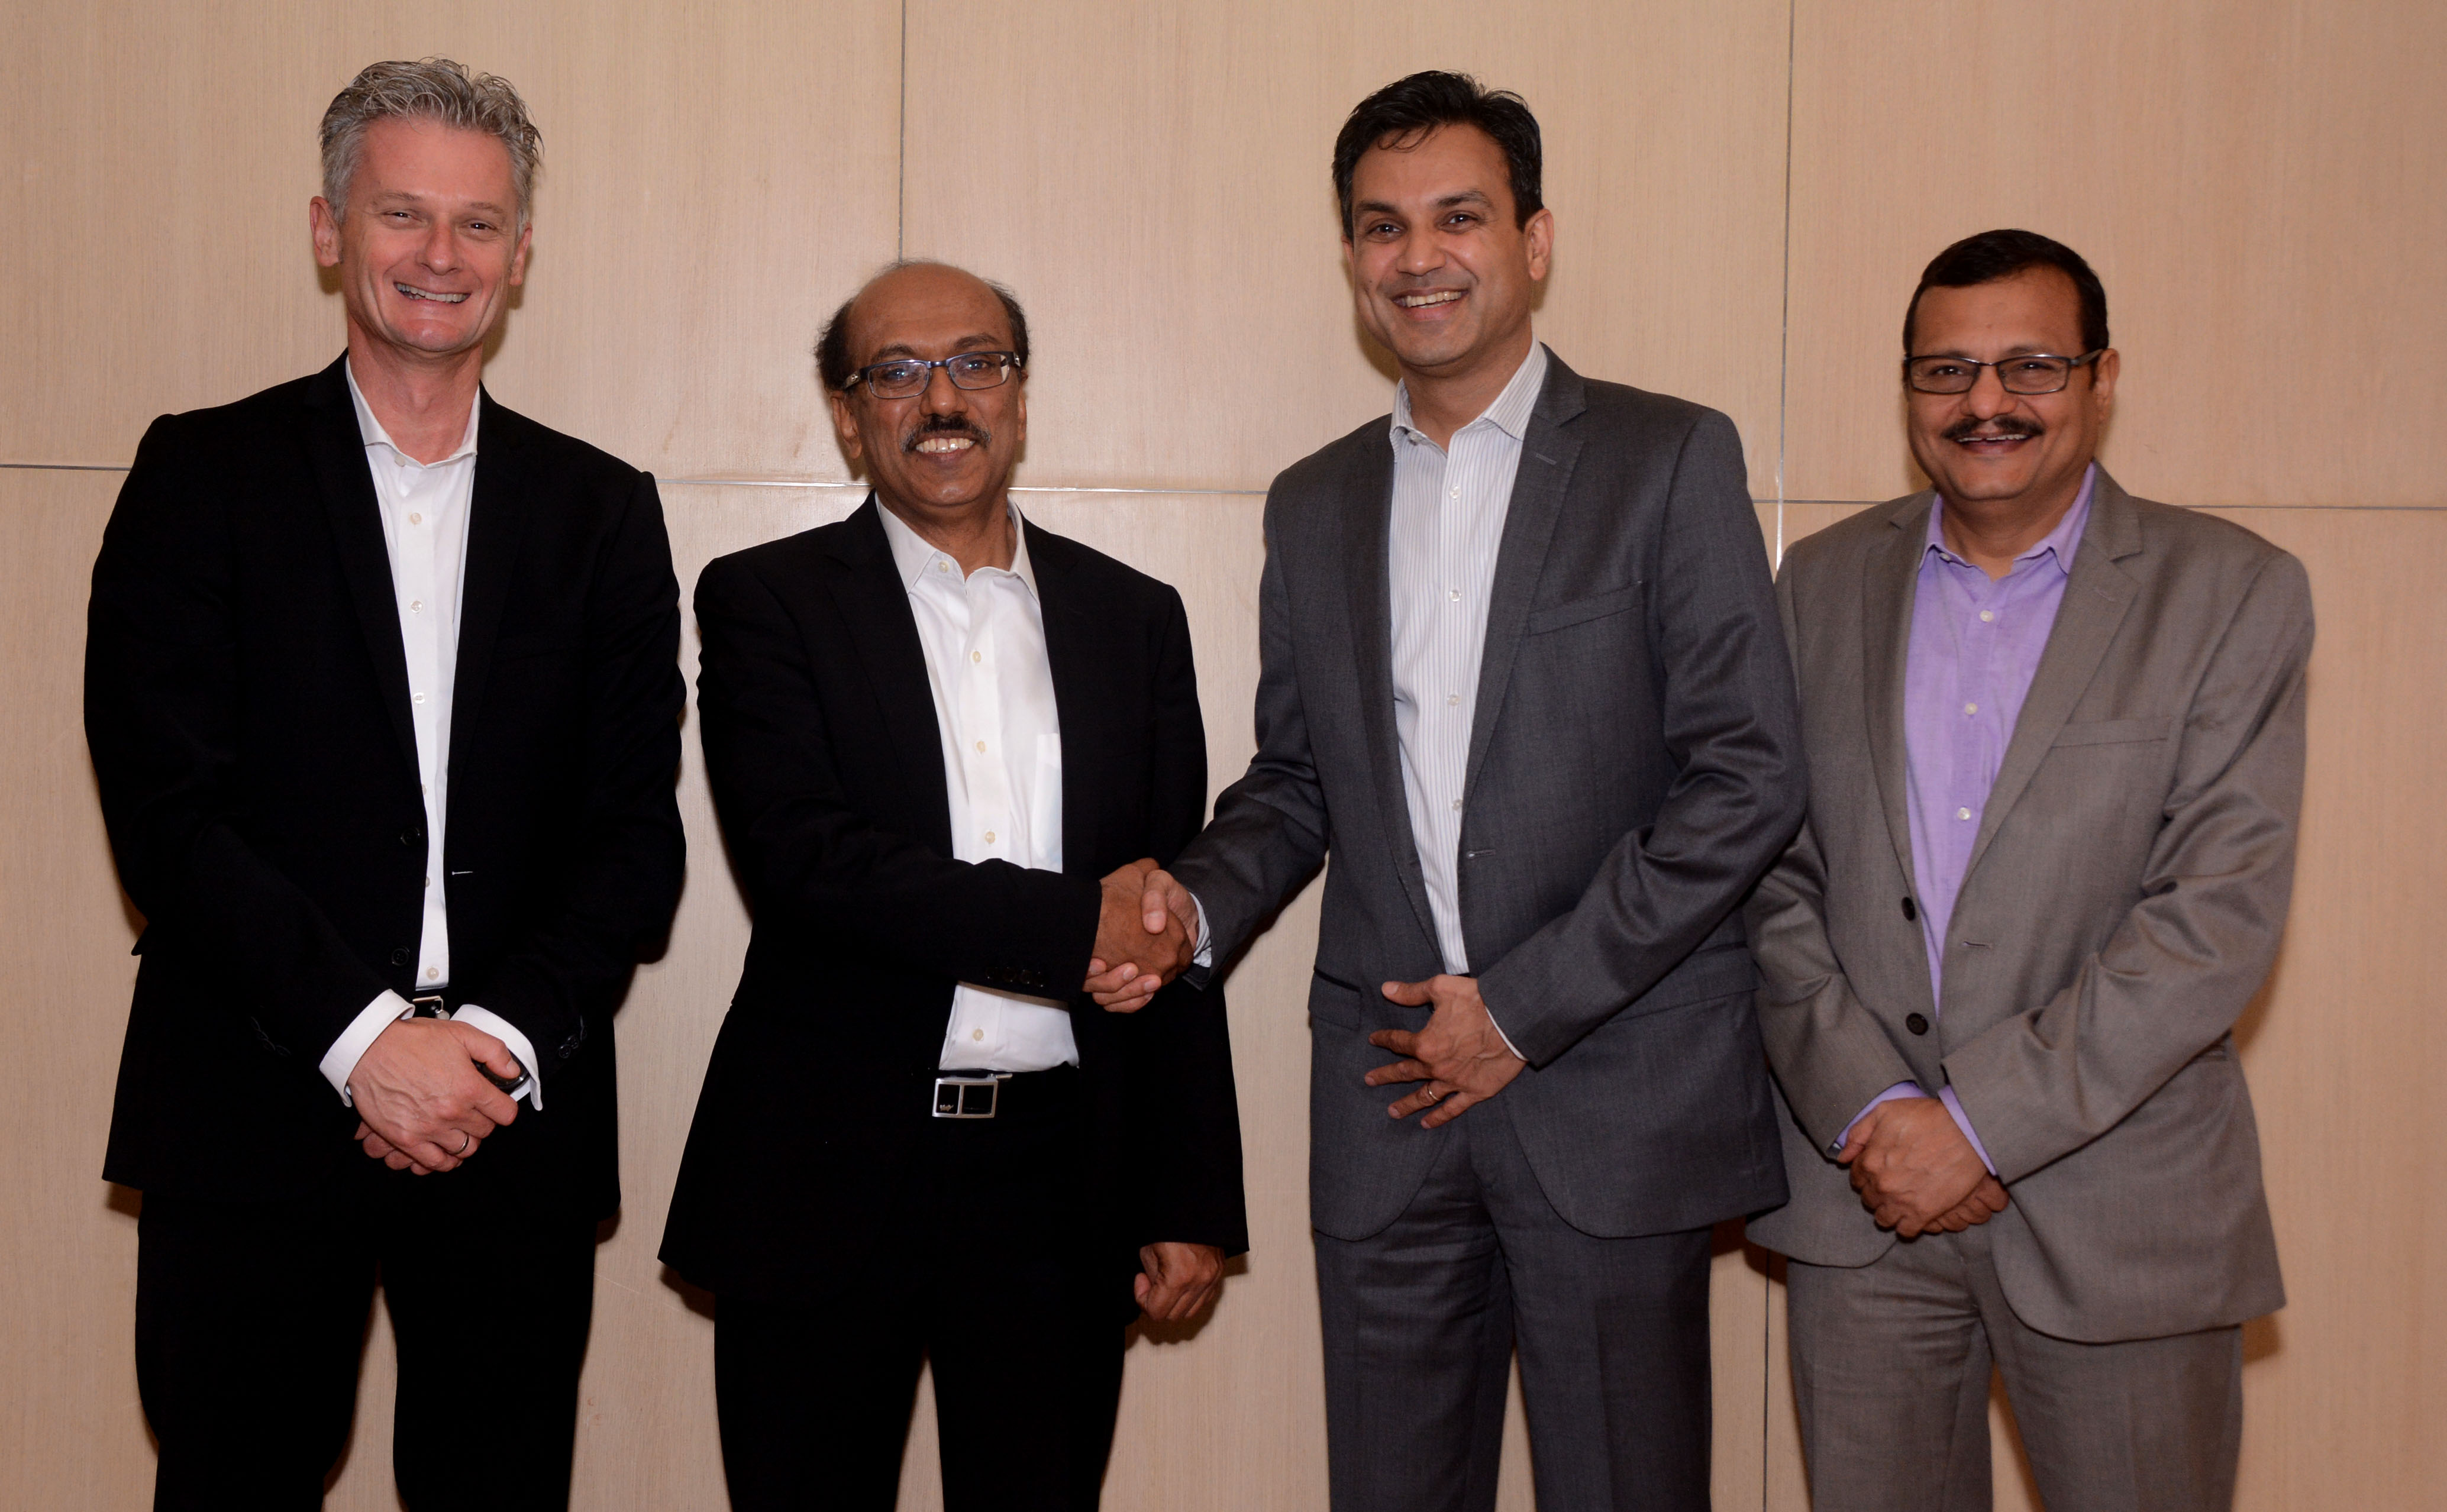 (L–R) Ralph Haupter, Corporate VP & President Asia, Microsoft; Virender Aggarwal, CEO, Ramco Systems, Anant Maheshwari, President, Microsoft India; and, Raghvendra Tripathi, Head – India Operations, Ramco Systems announcing the launch of the joint offering